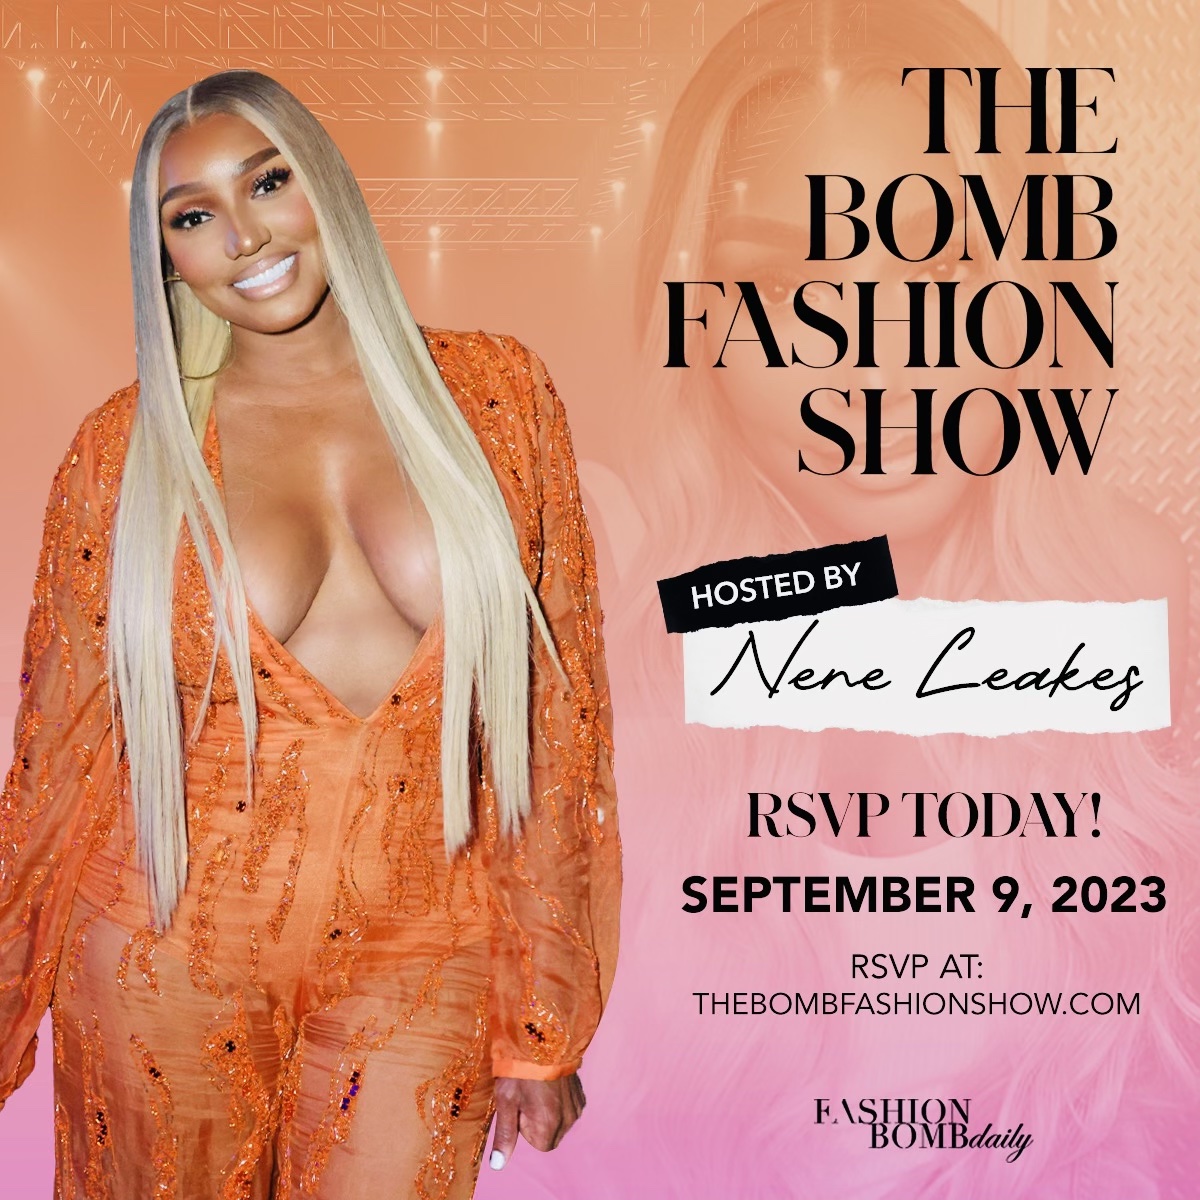 Nene Leakes Is the Host of the Bomb Fashion Show! RSVP Today + Read More About What You Can Expect on Saturday, September 9th